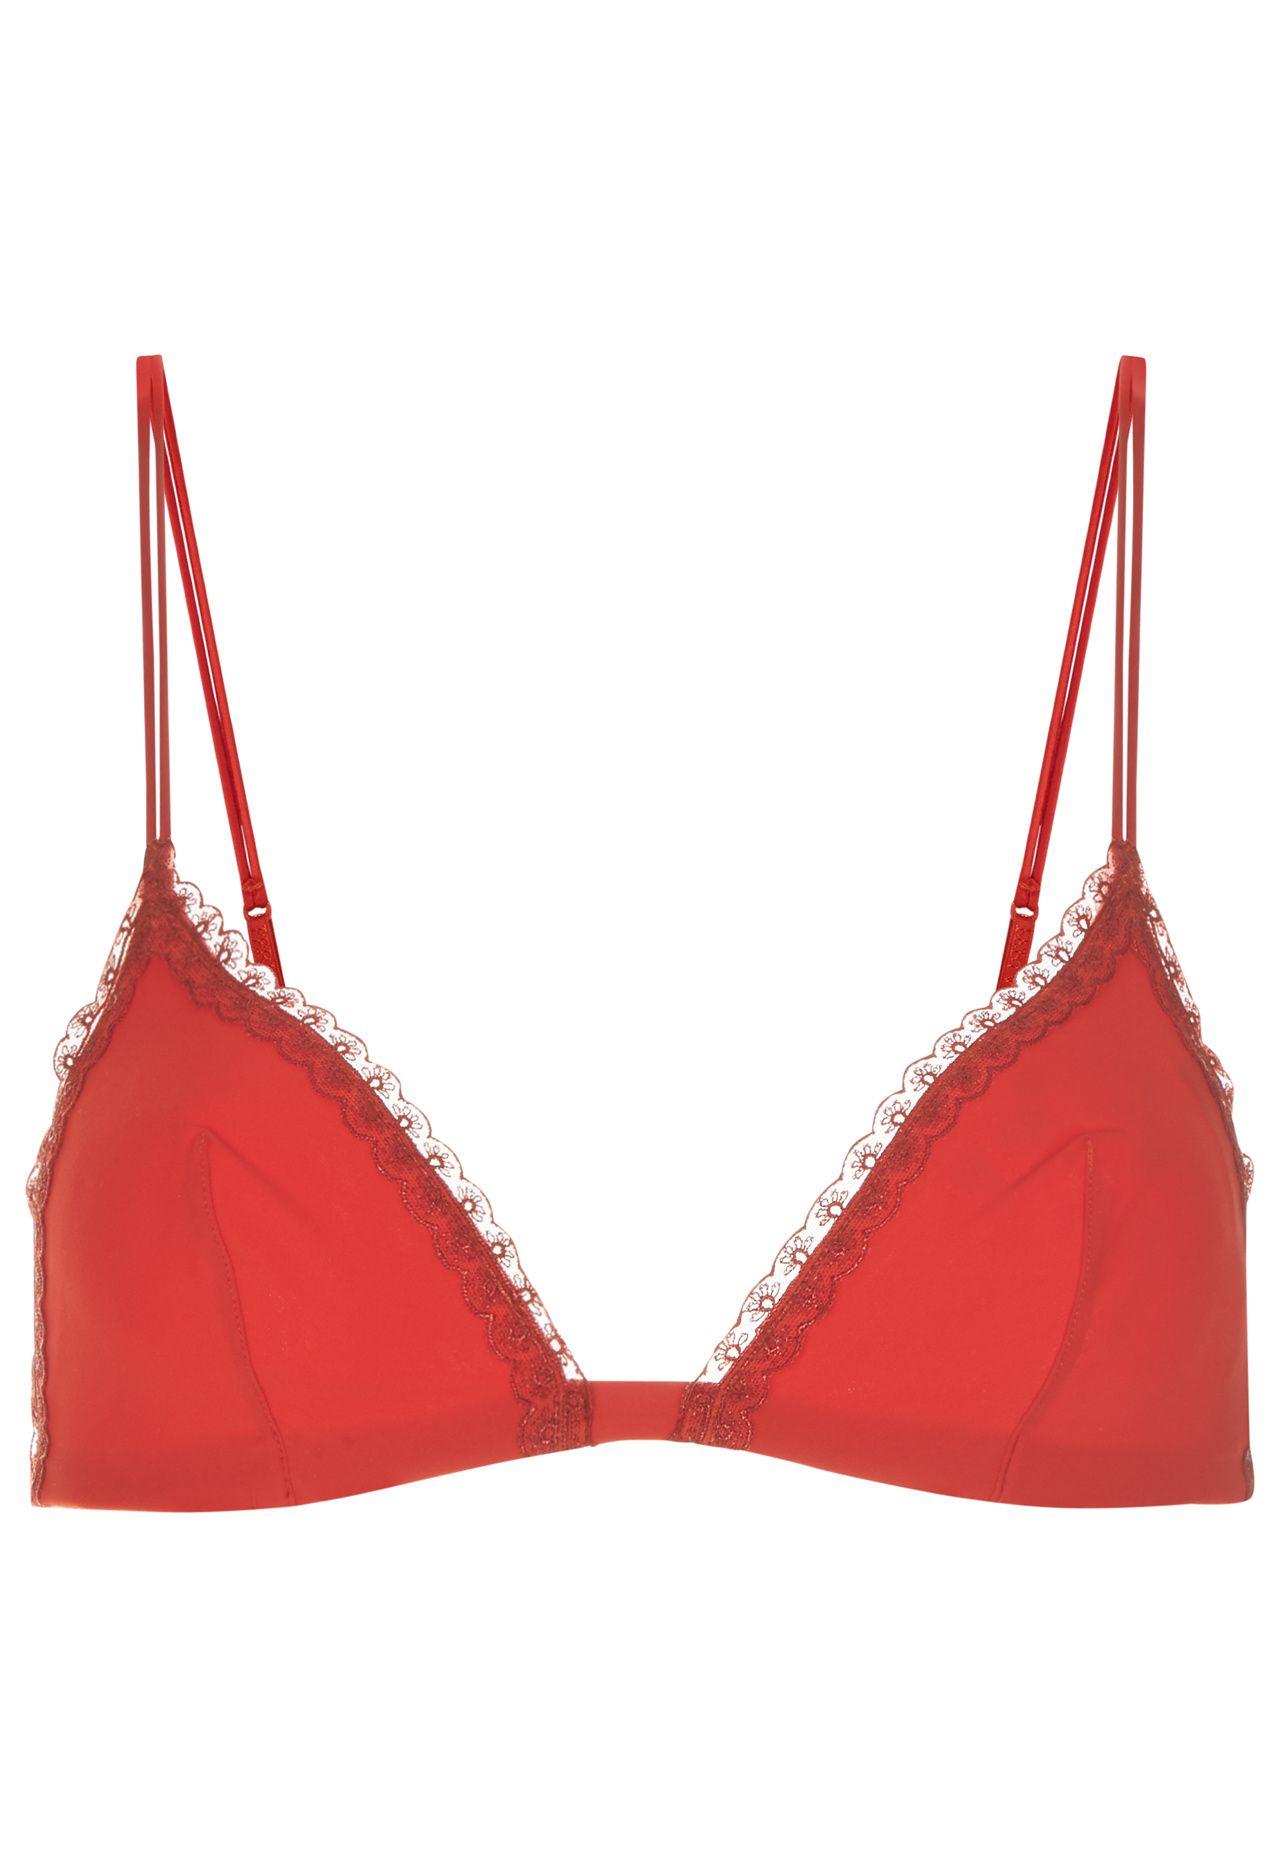 Red Triangle Clothing Logo - Moonstone Poppy Red Triangle Bra With Chintz Embroidery | La Perla